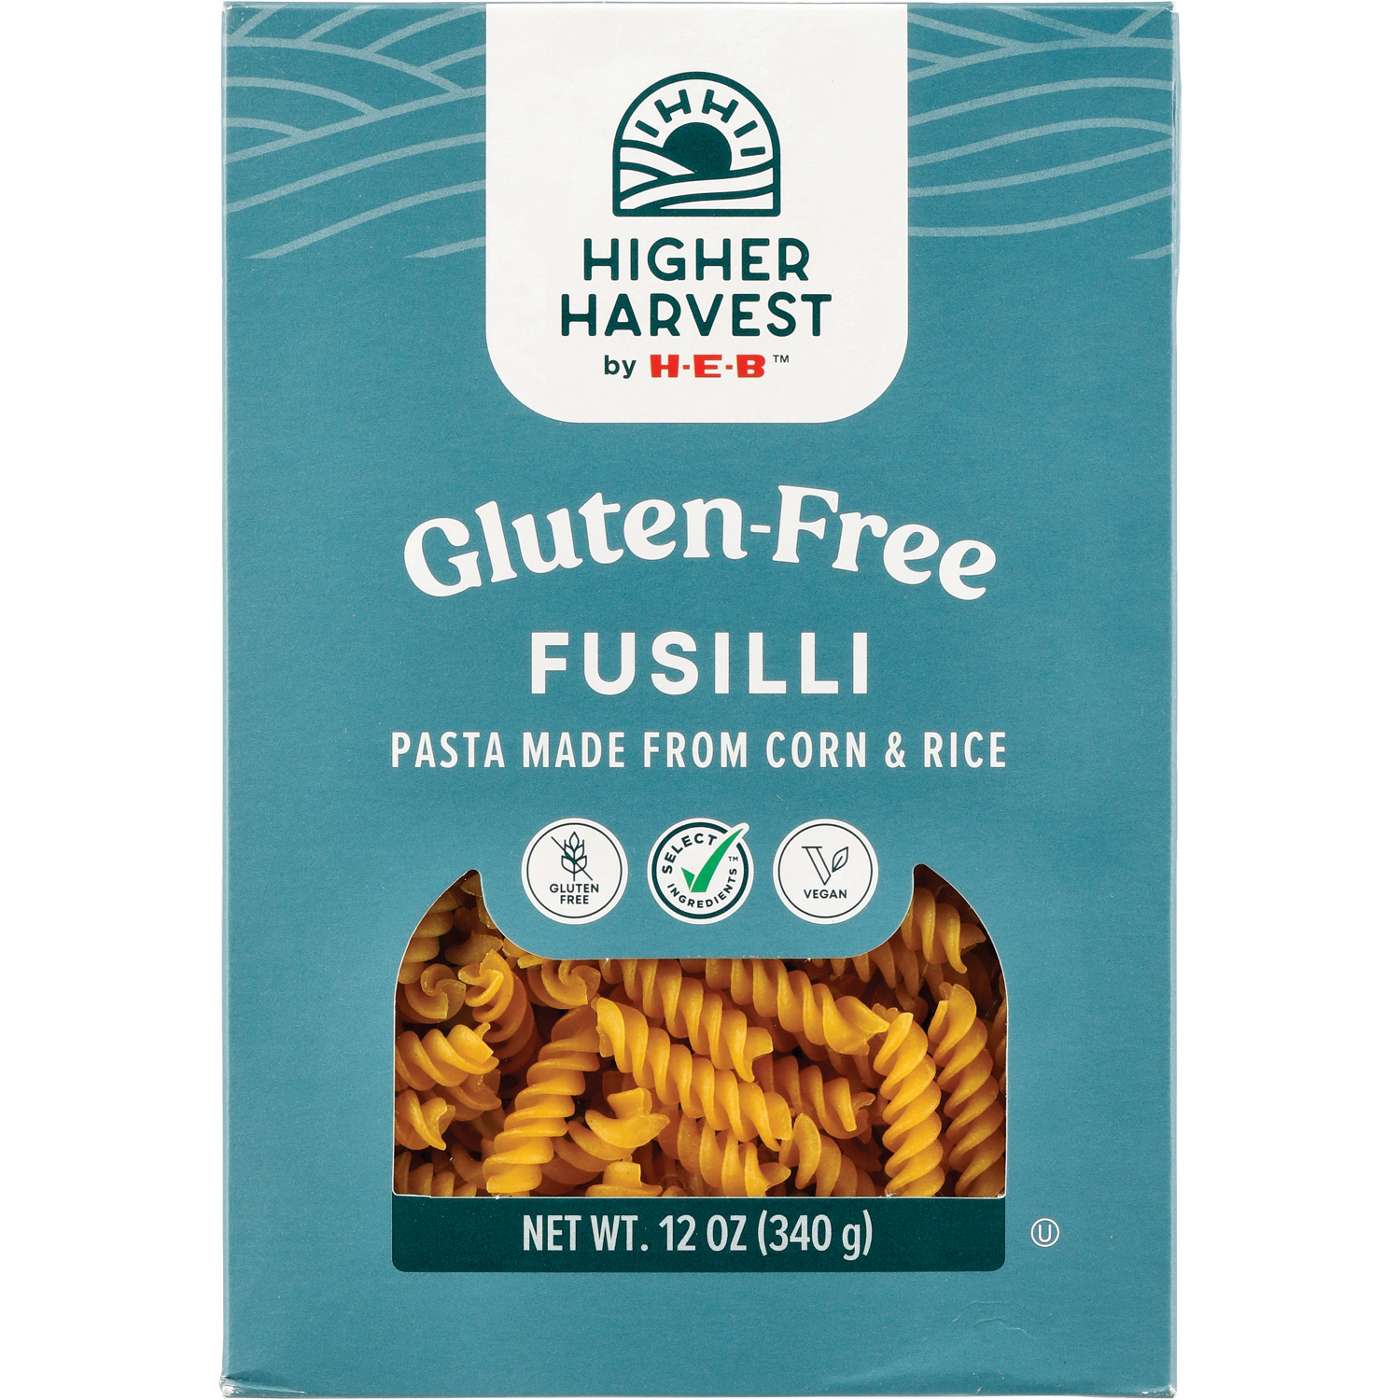 Higher Harvest by H-E-B Gluten-Free Fusilli Pasta Noodles; image 1 of 3